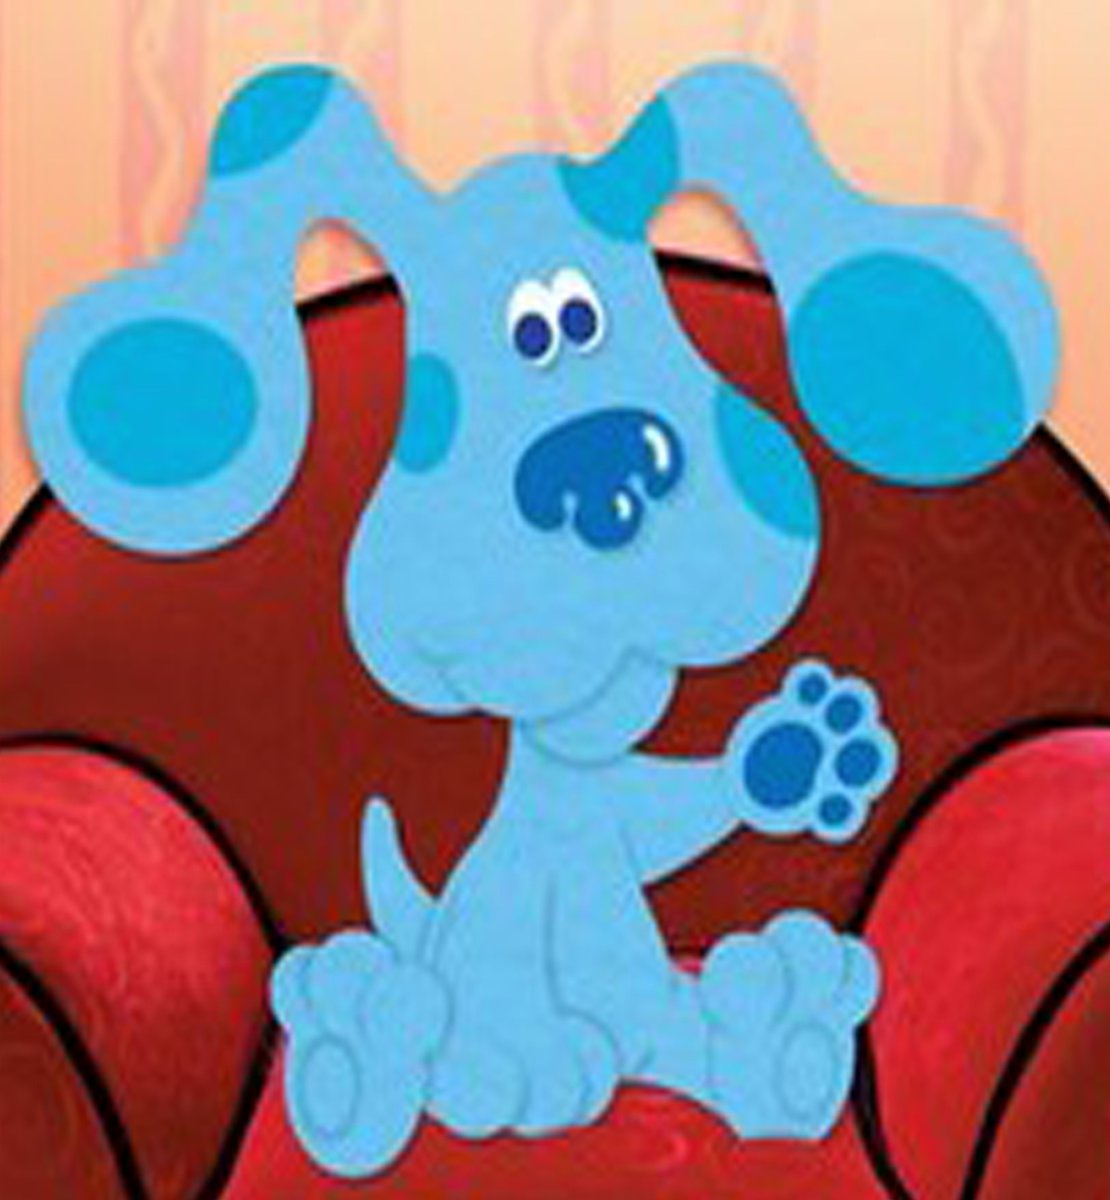 🐾Blue! One of my first fav characters ever, as I have memories of watching Blue's Clues as early as 1999! I loved her blue pawprints & was a trait that always stuck with me! Heres where Kosmo comes in! His blue pawprint motif/his ability to stamp blue prints is a homage to her!